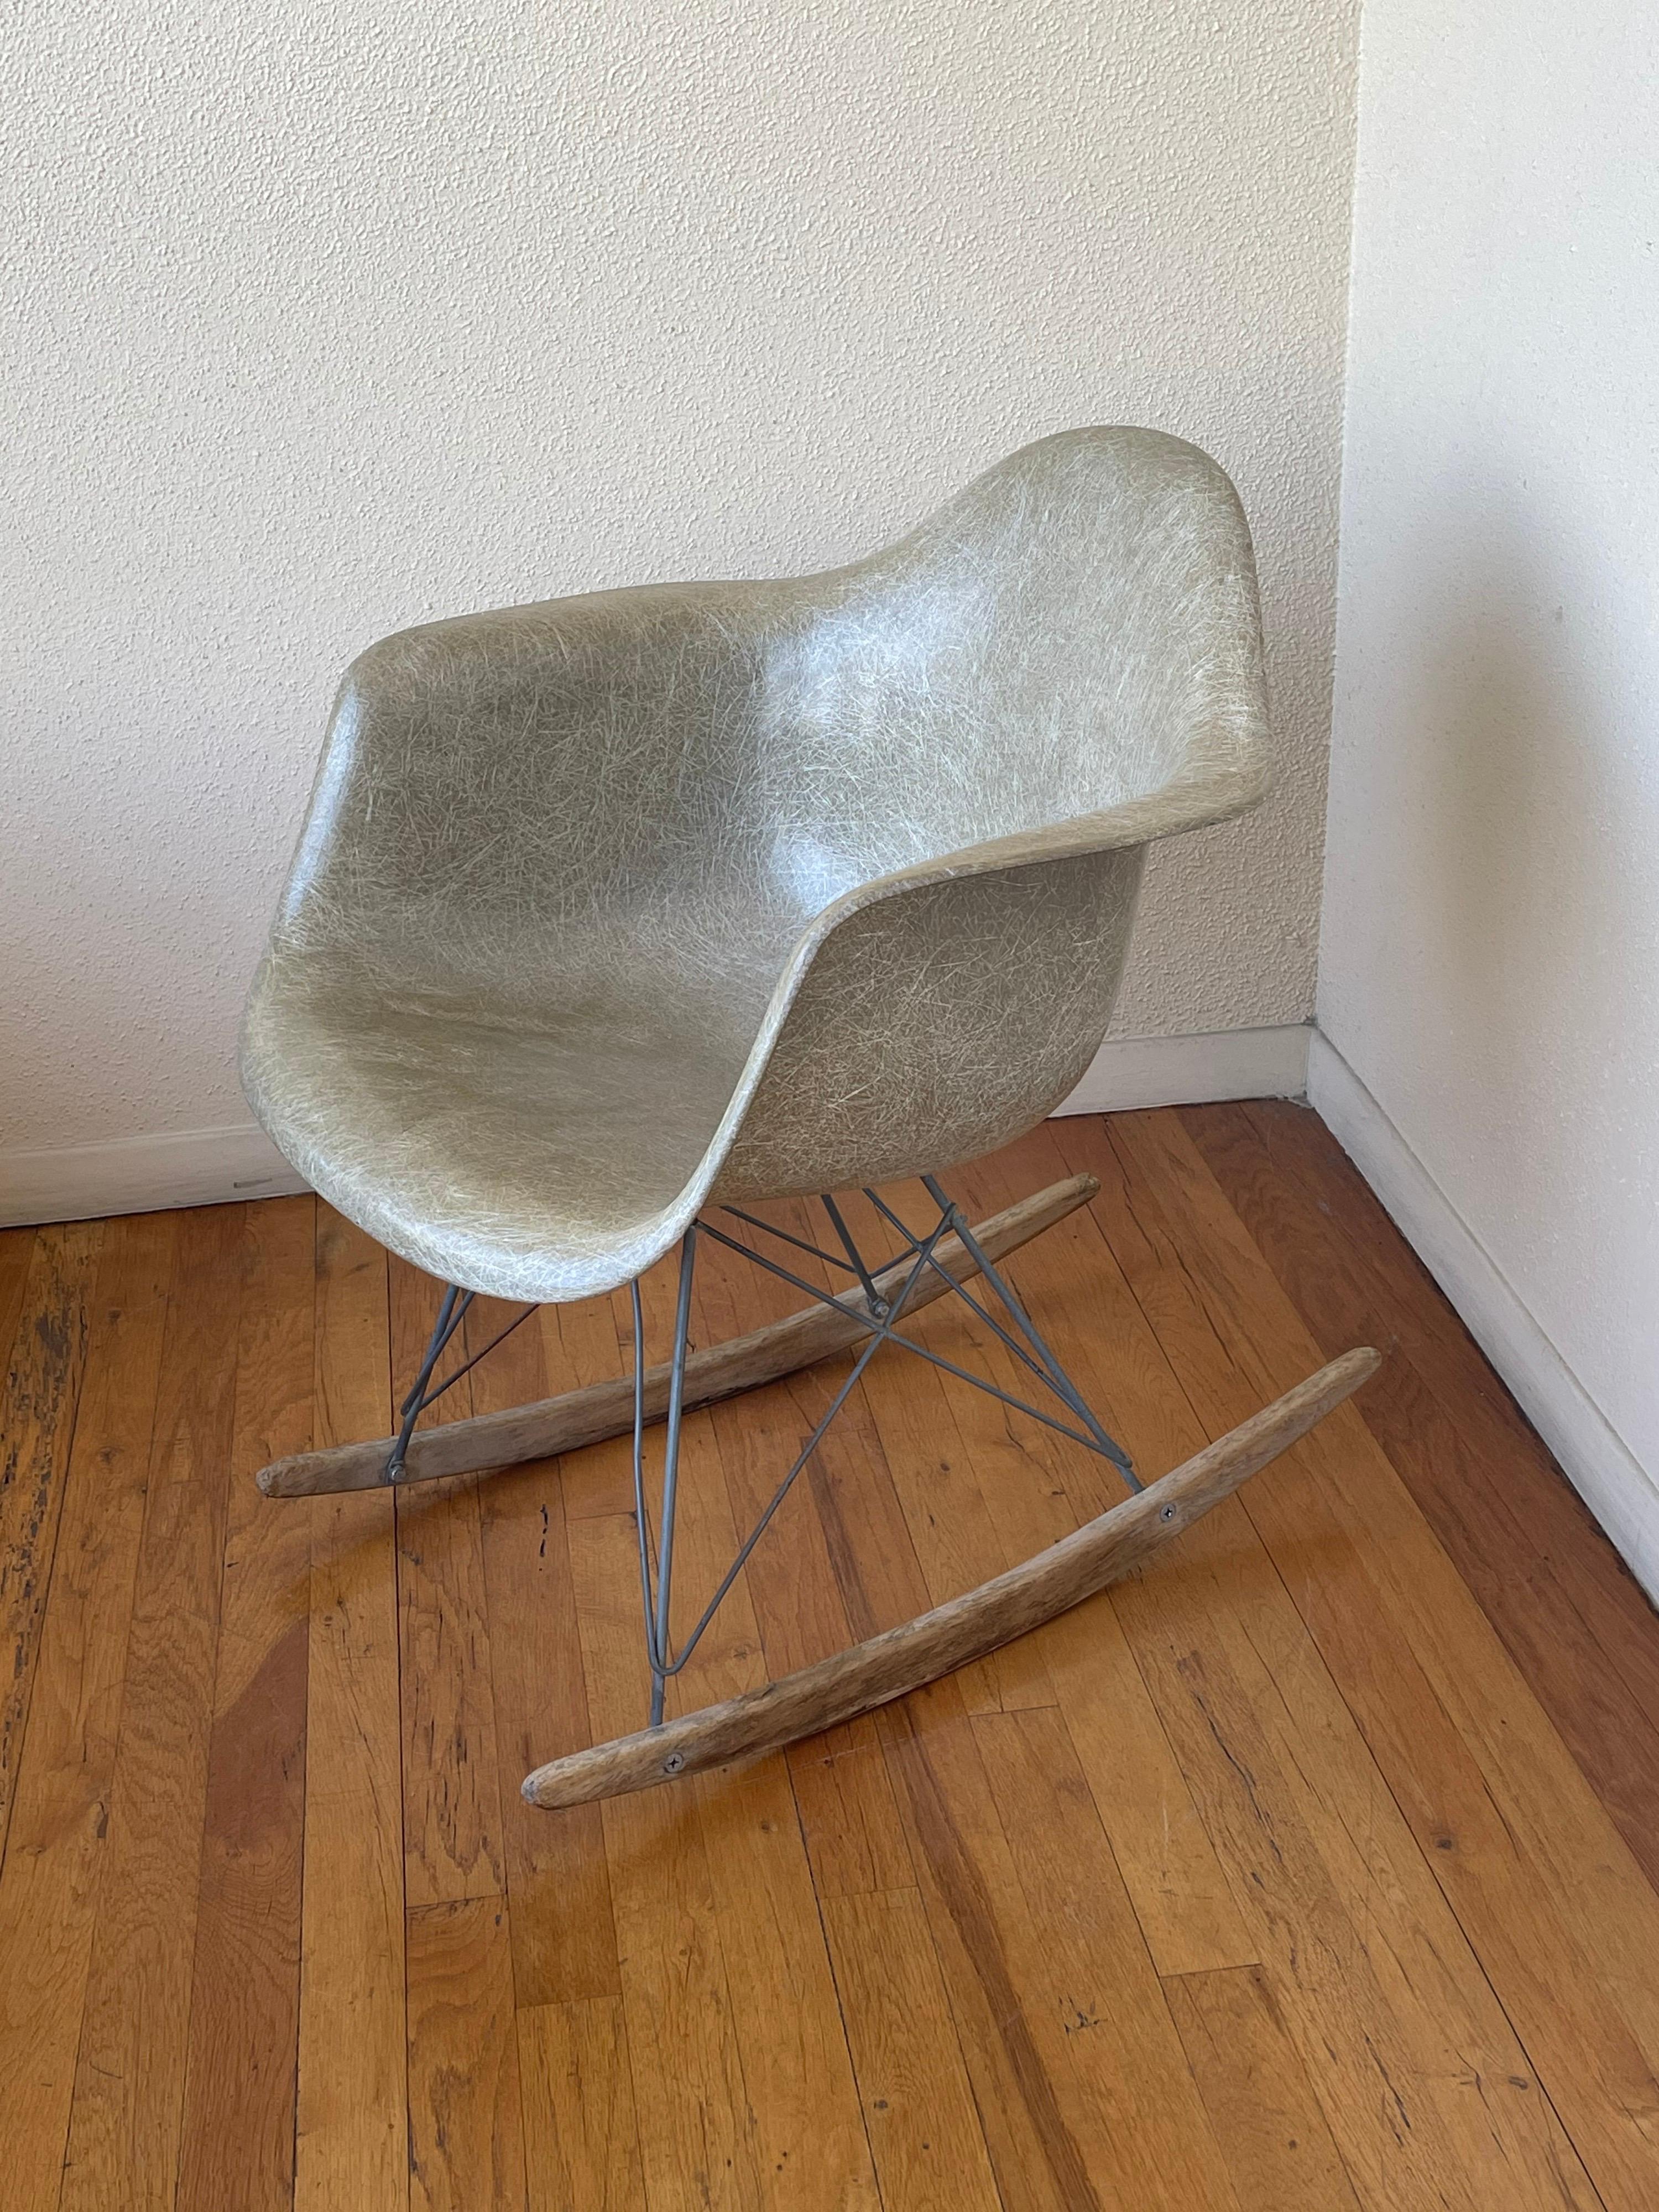 A beautiful very rare early production Eames original rocker circa 1950's, beautiful color with original tag rope edge, the frame shows a bit bent and the wood sliders are worn and chew on the tips as shown, the shell it's in very nice condition and